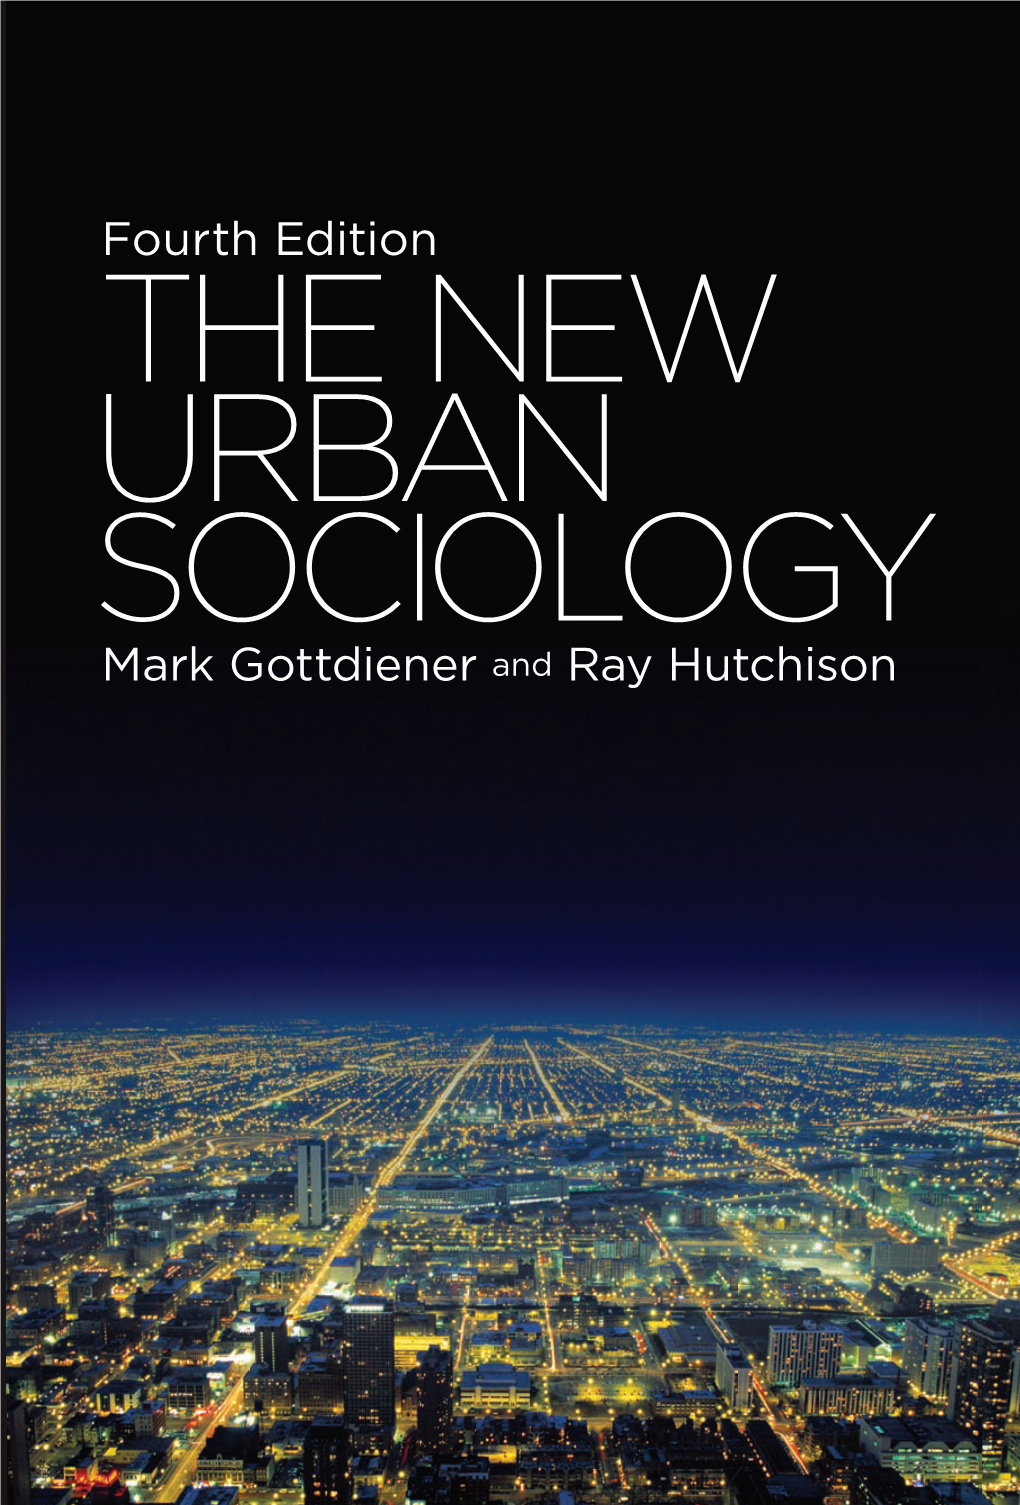 The New Urban Sociology Blends Theory and Examples to Give Readers an Accessible and Engaging Work Suitable for Undergraduates, Urban Scholars, and General Readers